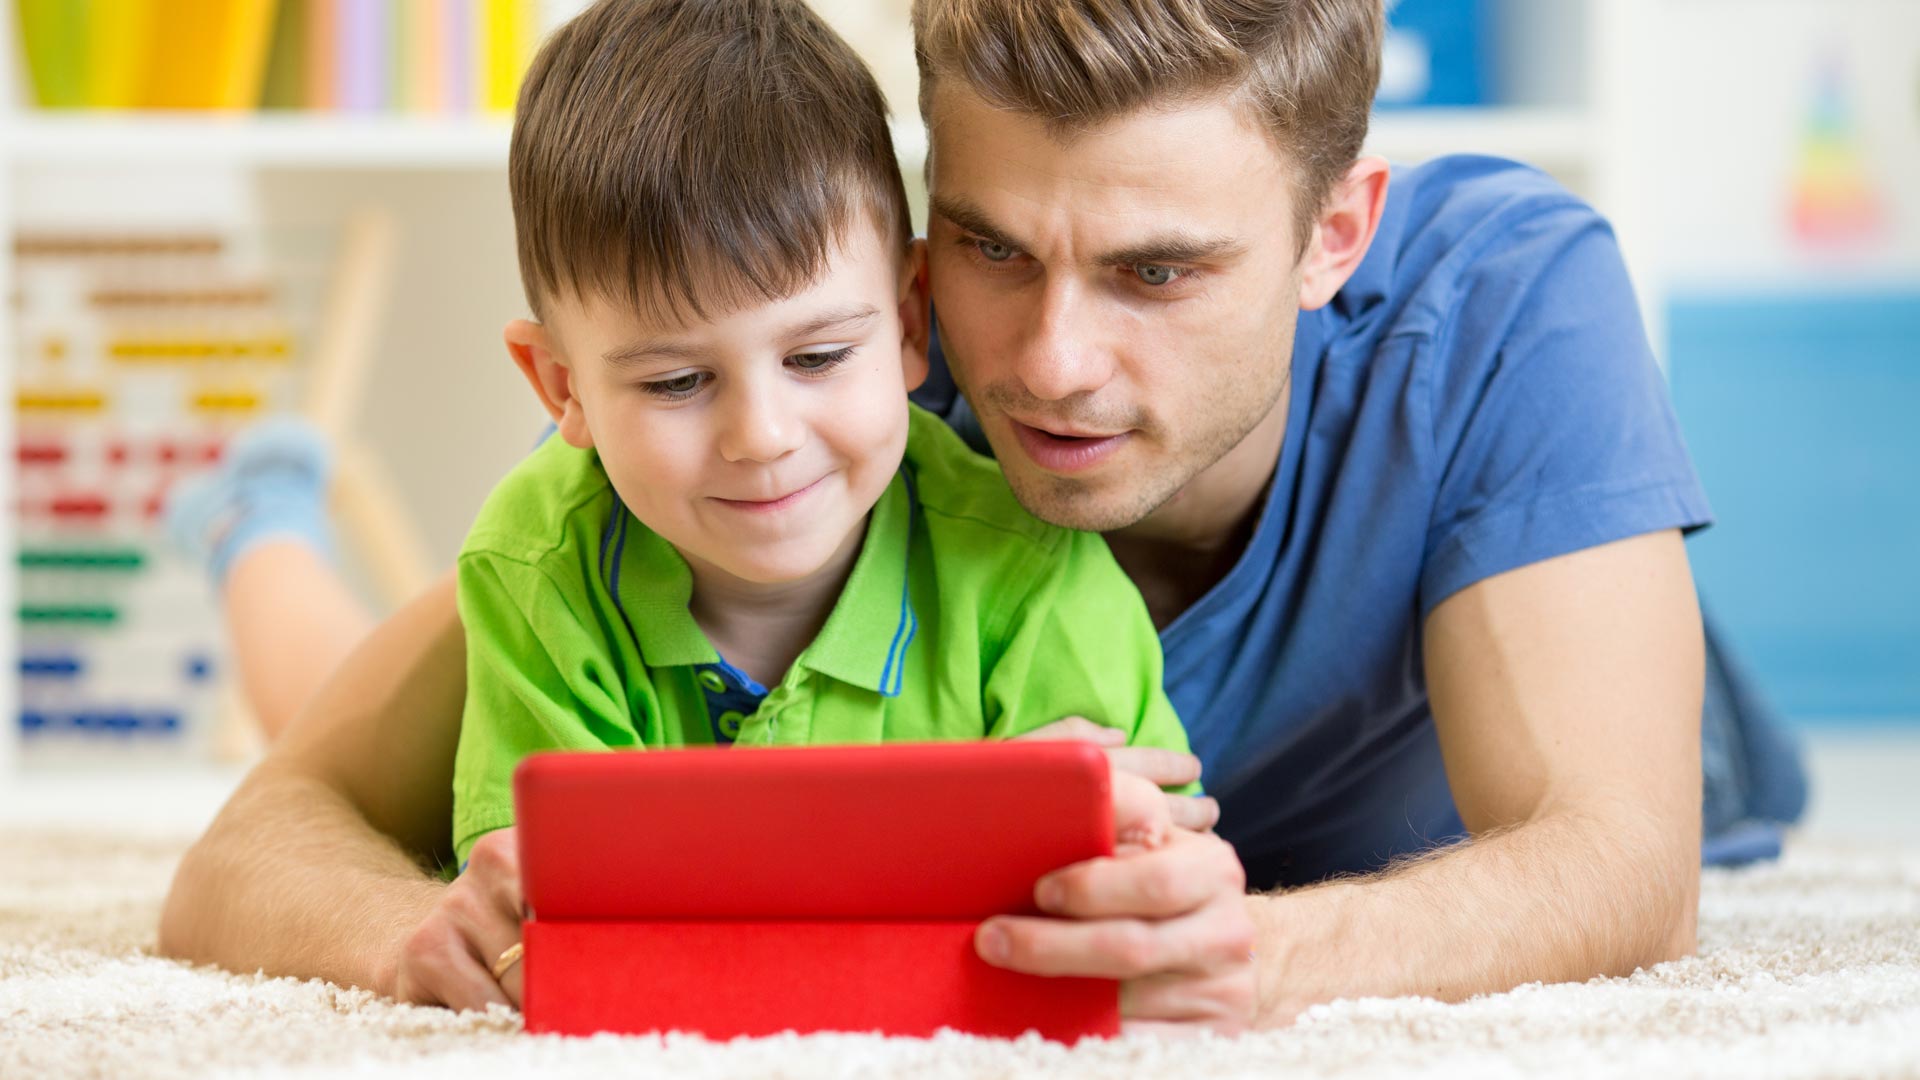 MacRae-Rentals-9-Educational-Apps-For-Kids-To-Play-and-Learn-header-image-1920x1080